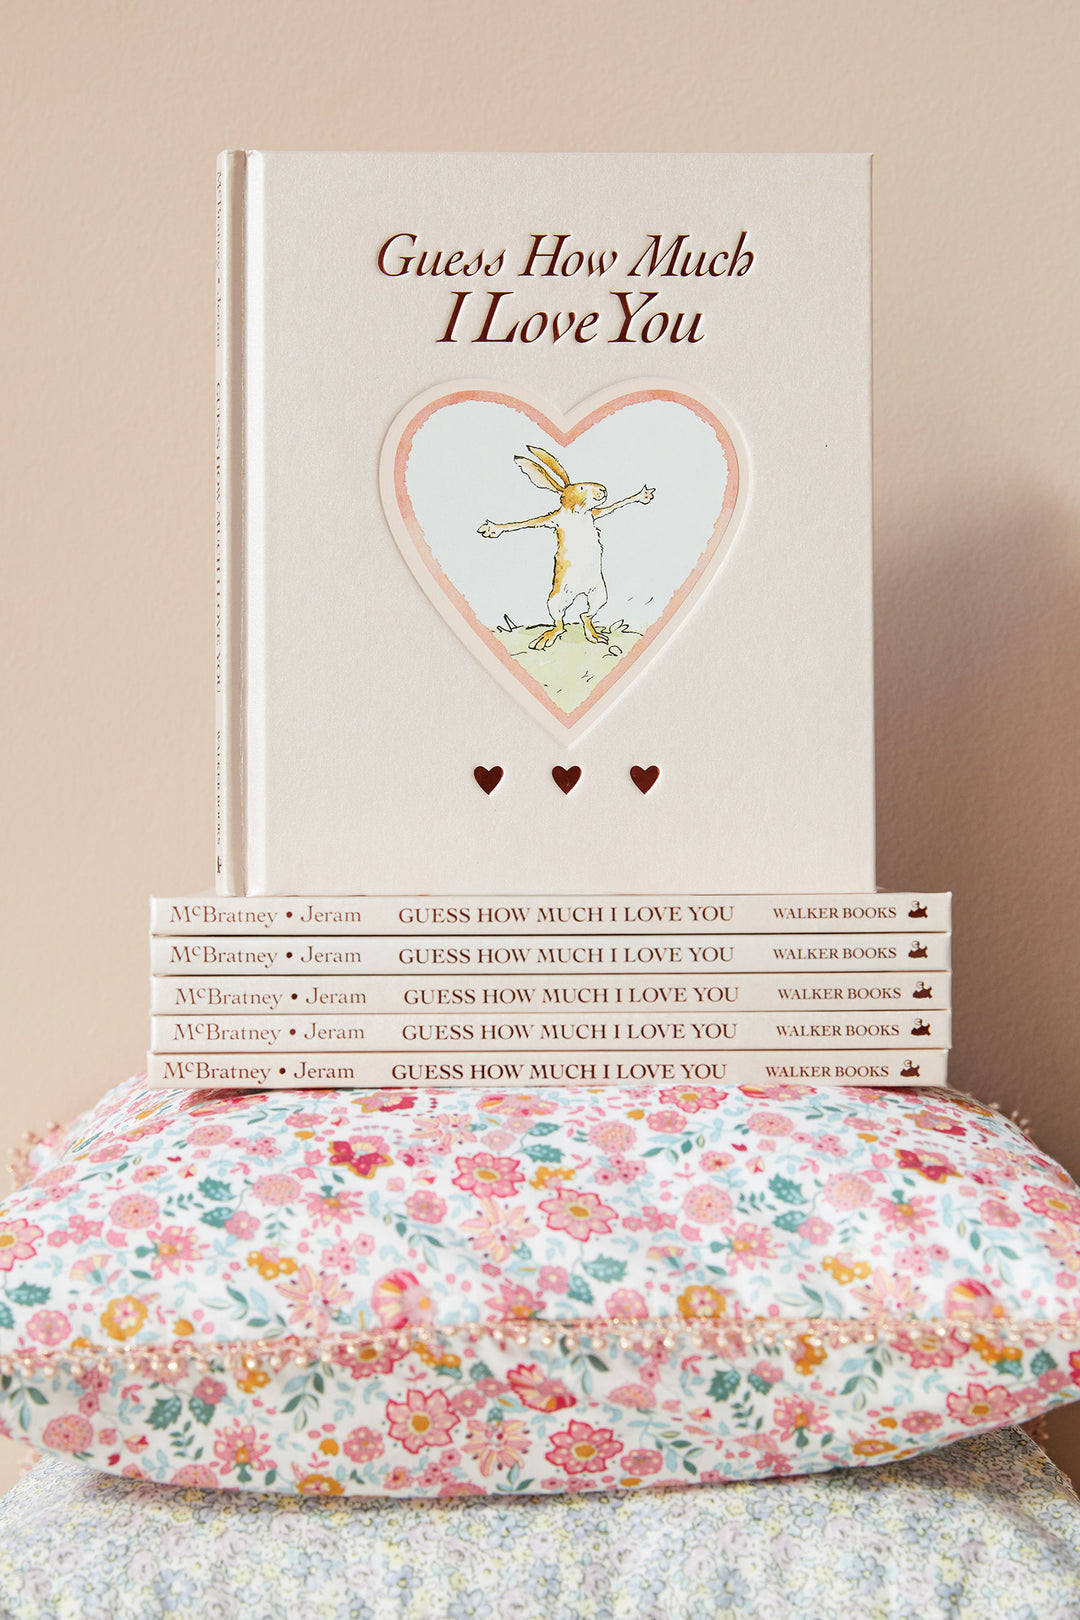 Guess how much I love you Book - Blush